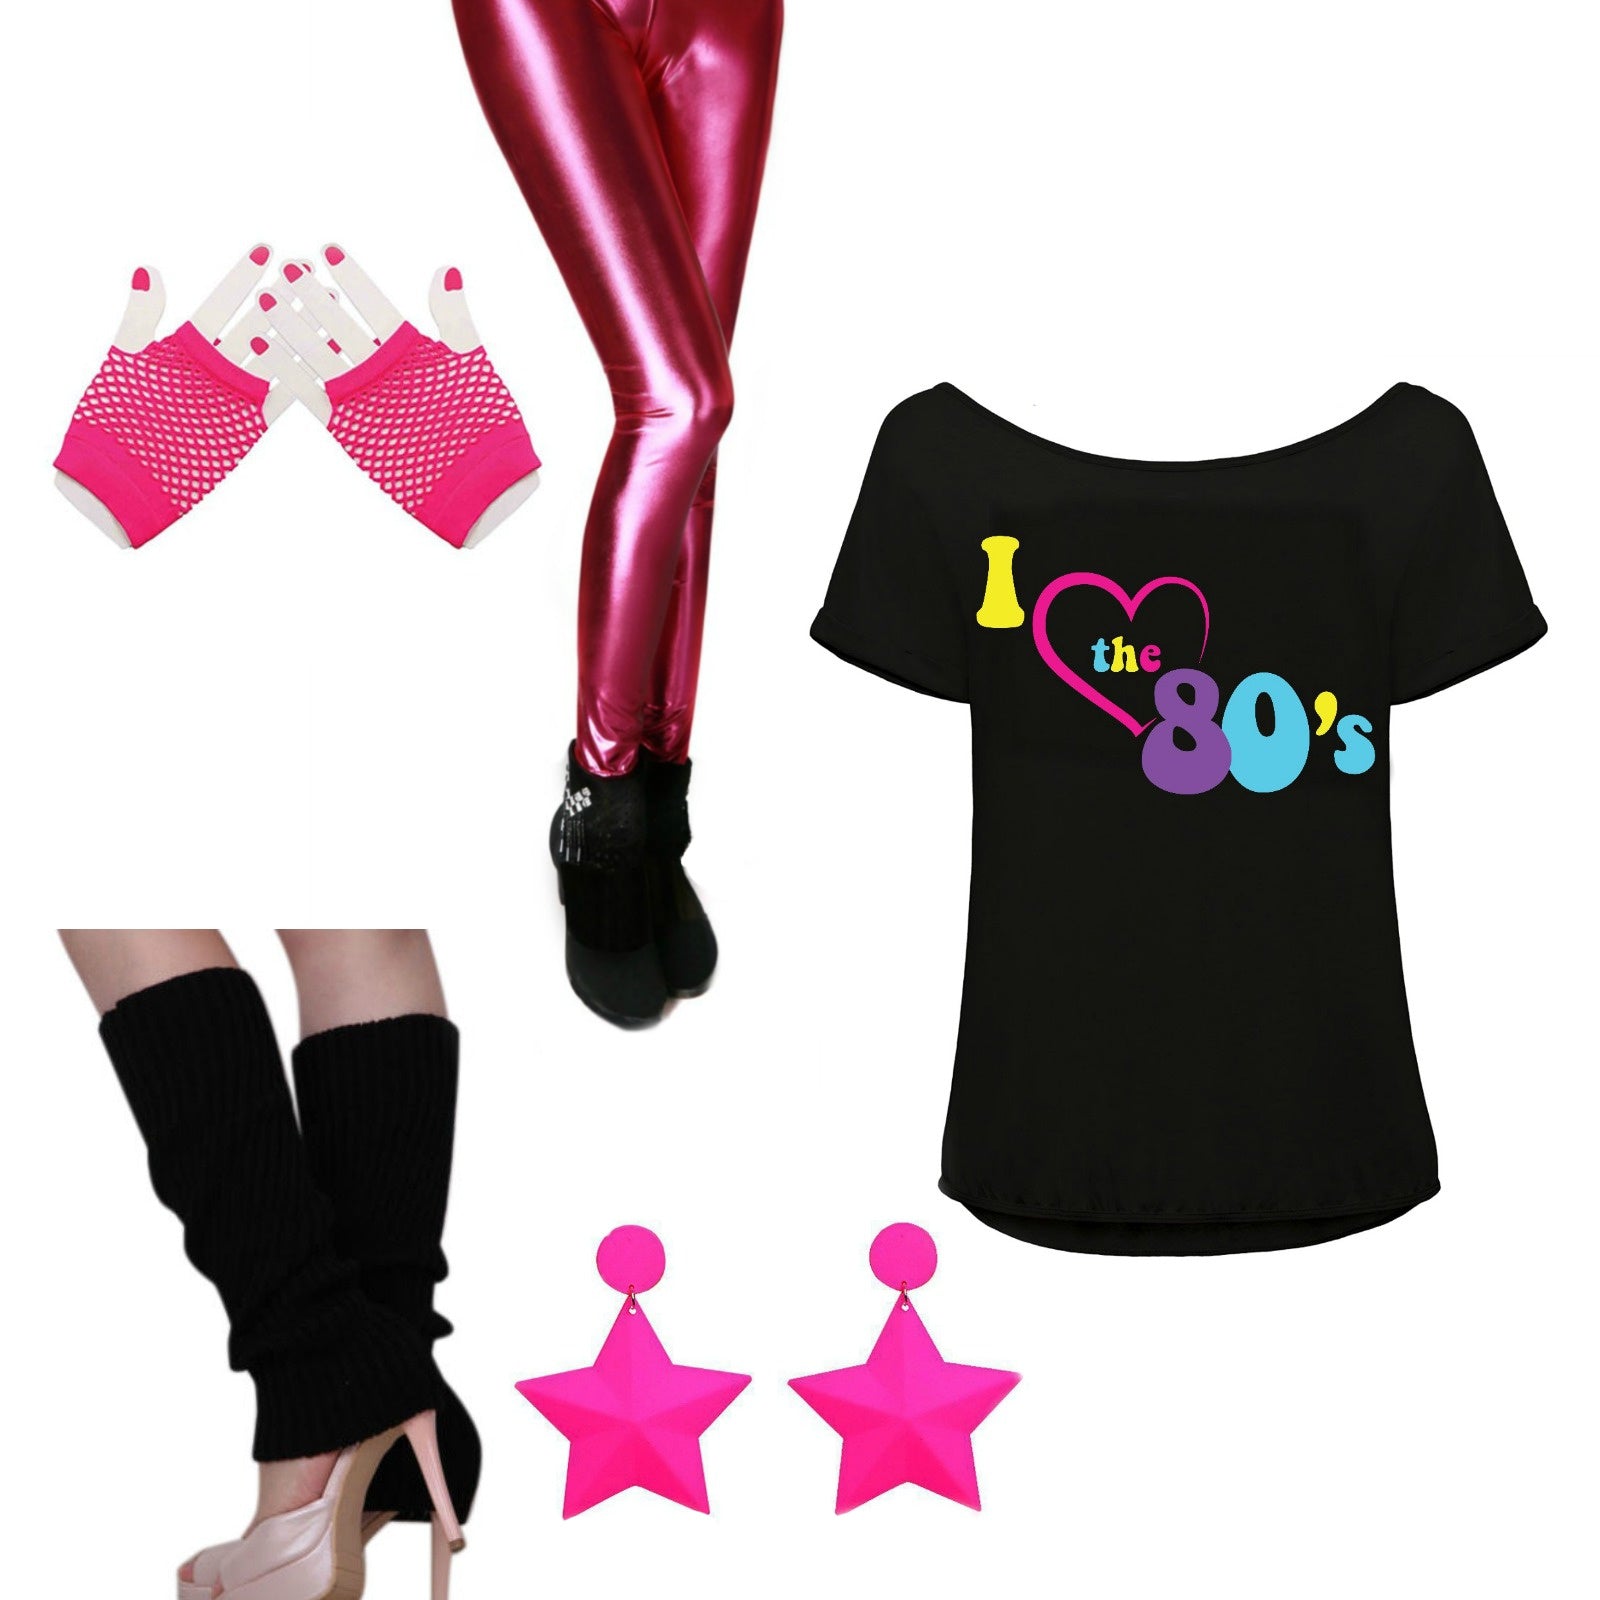 80s Fancy Dress Costume, Leggings, Top and Accessories - Party Ideaz